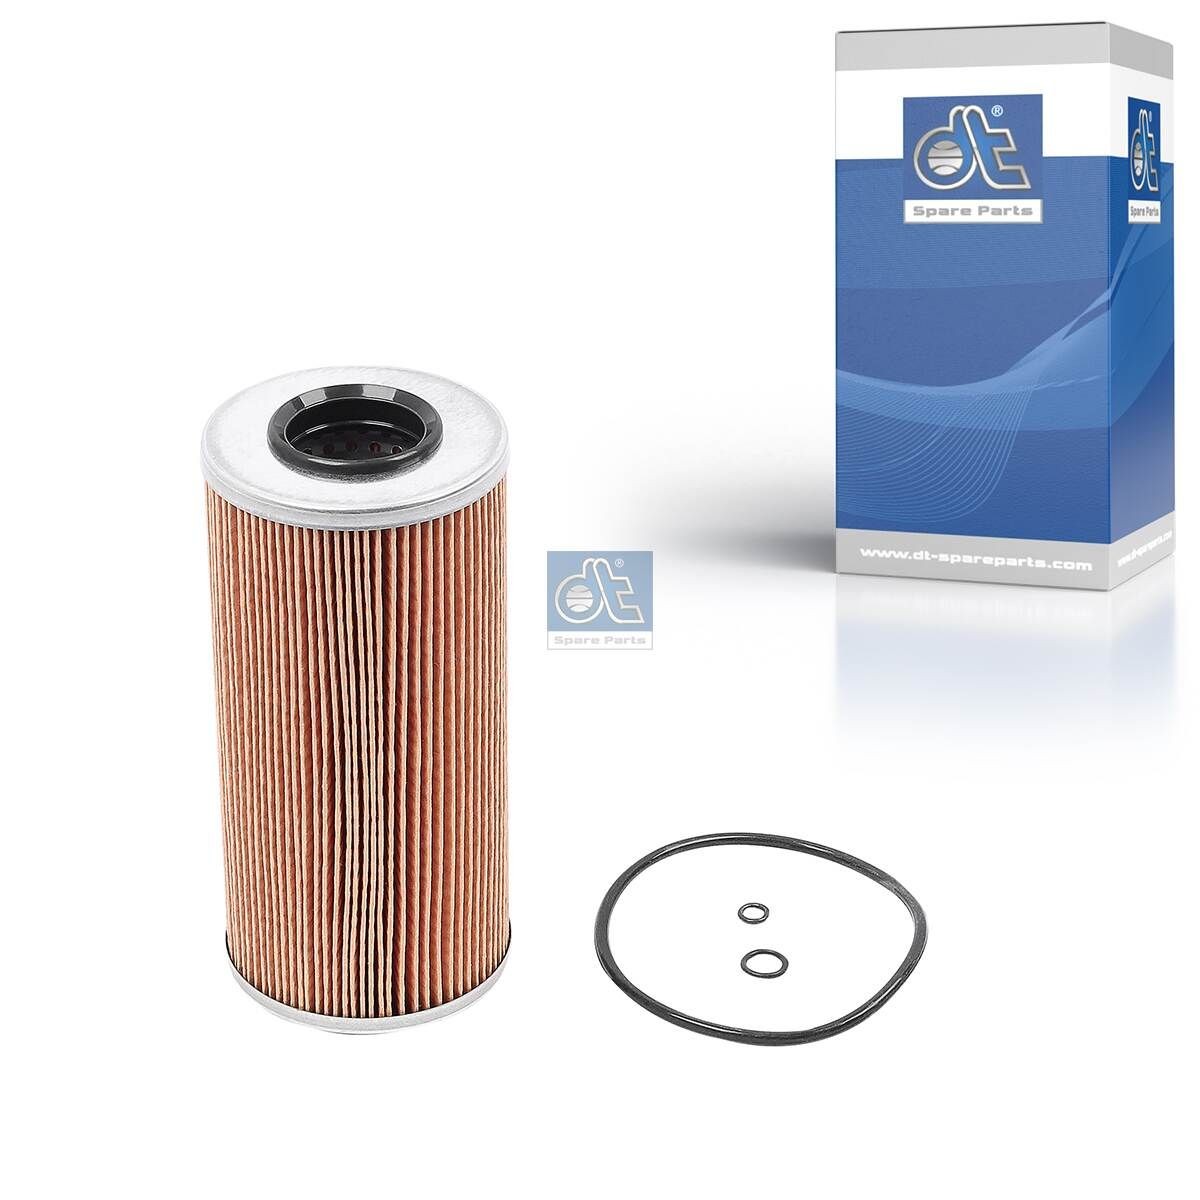 HU 951 x DT Spare Parts 3.14108 Oil filter 606 180 01 09